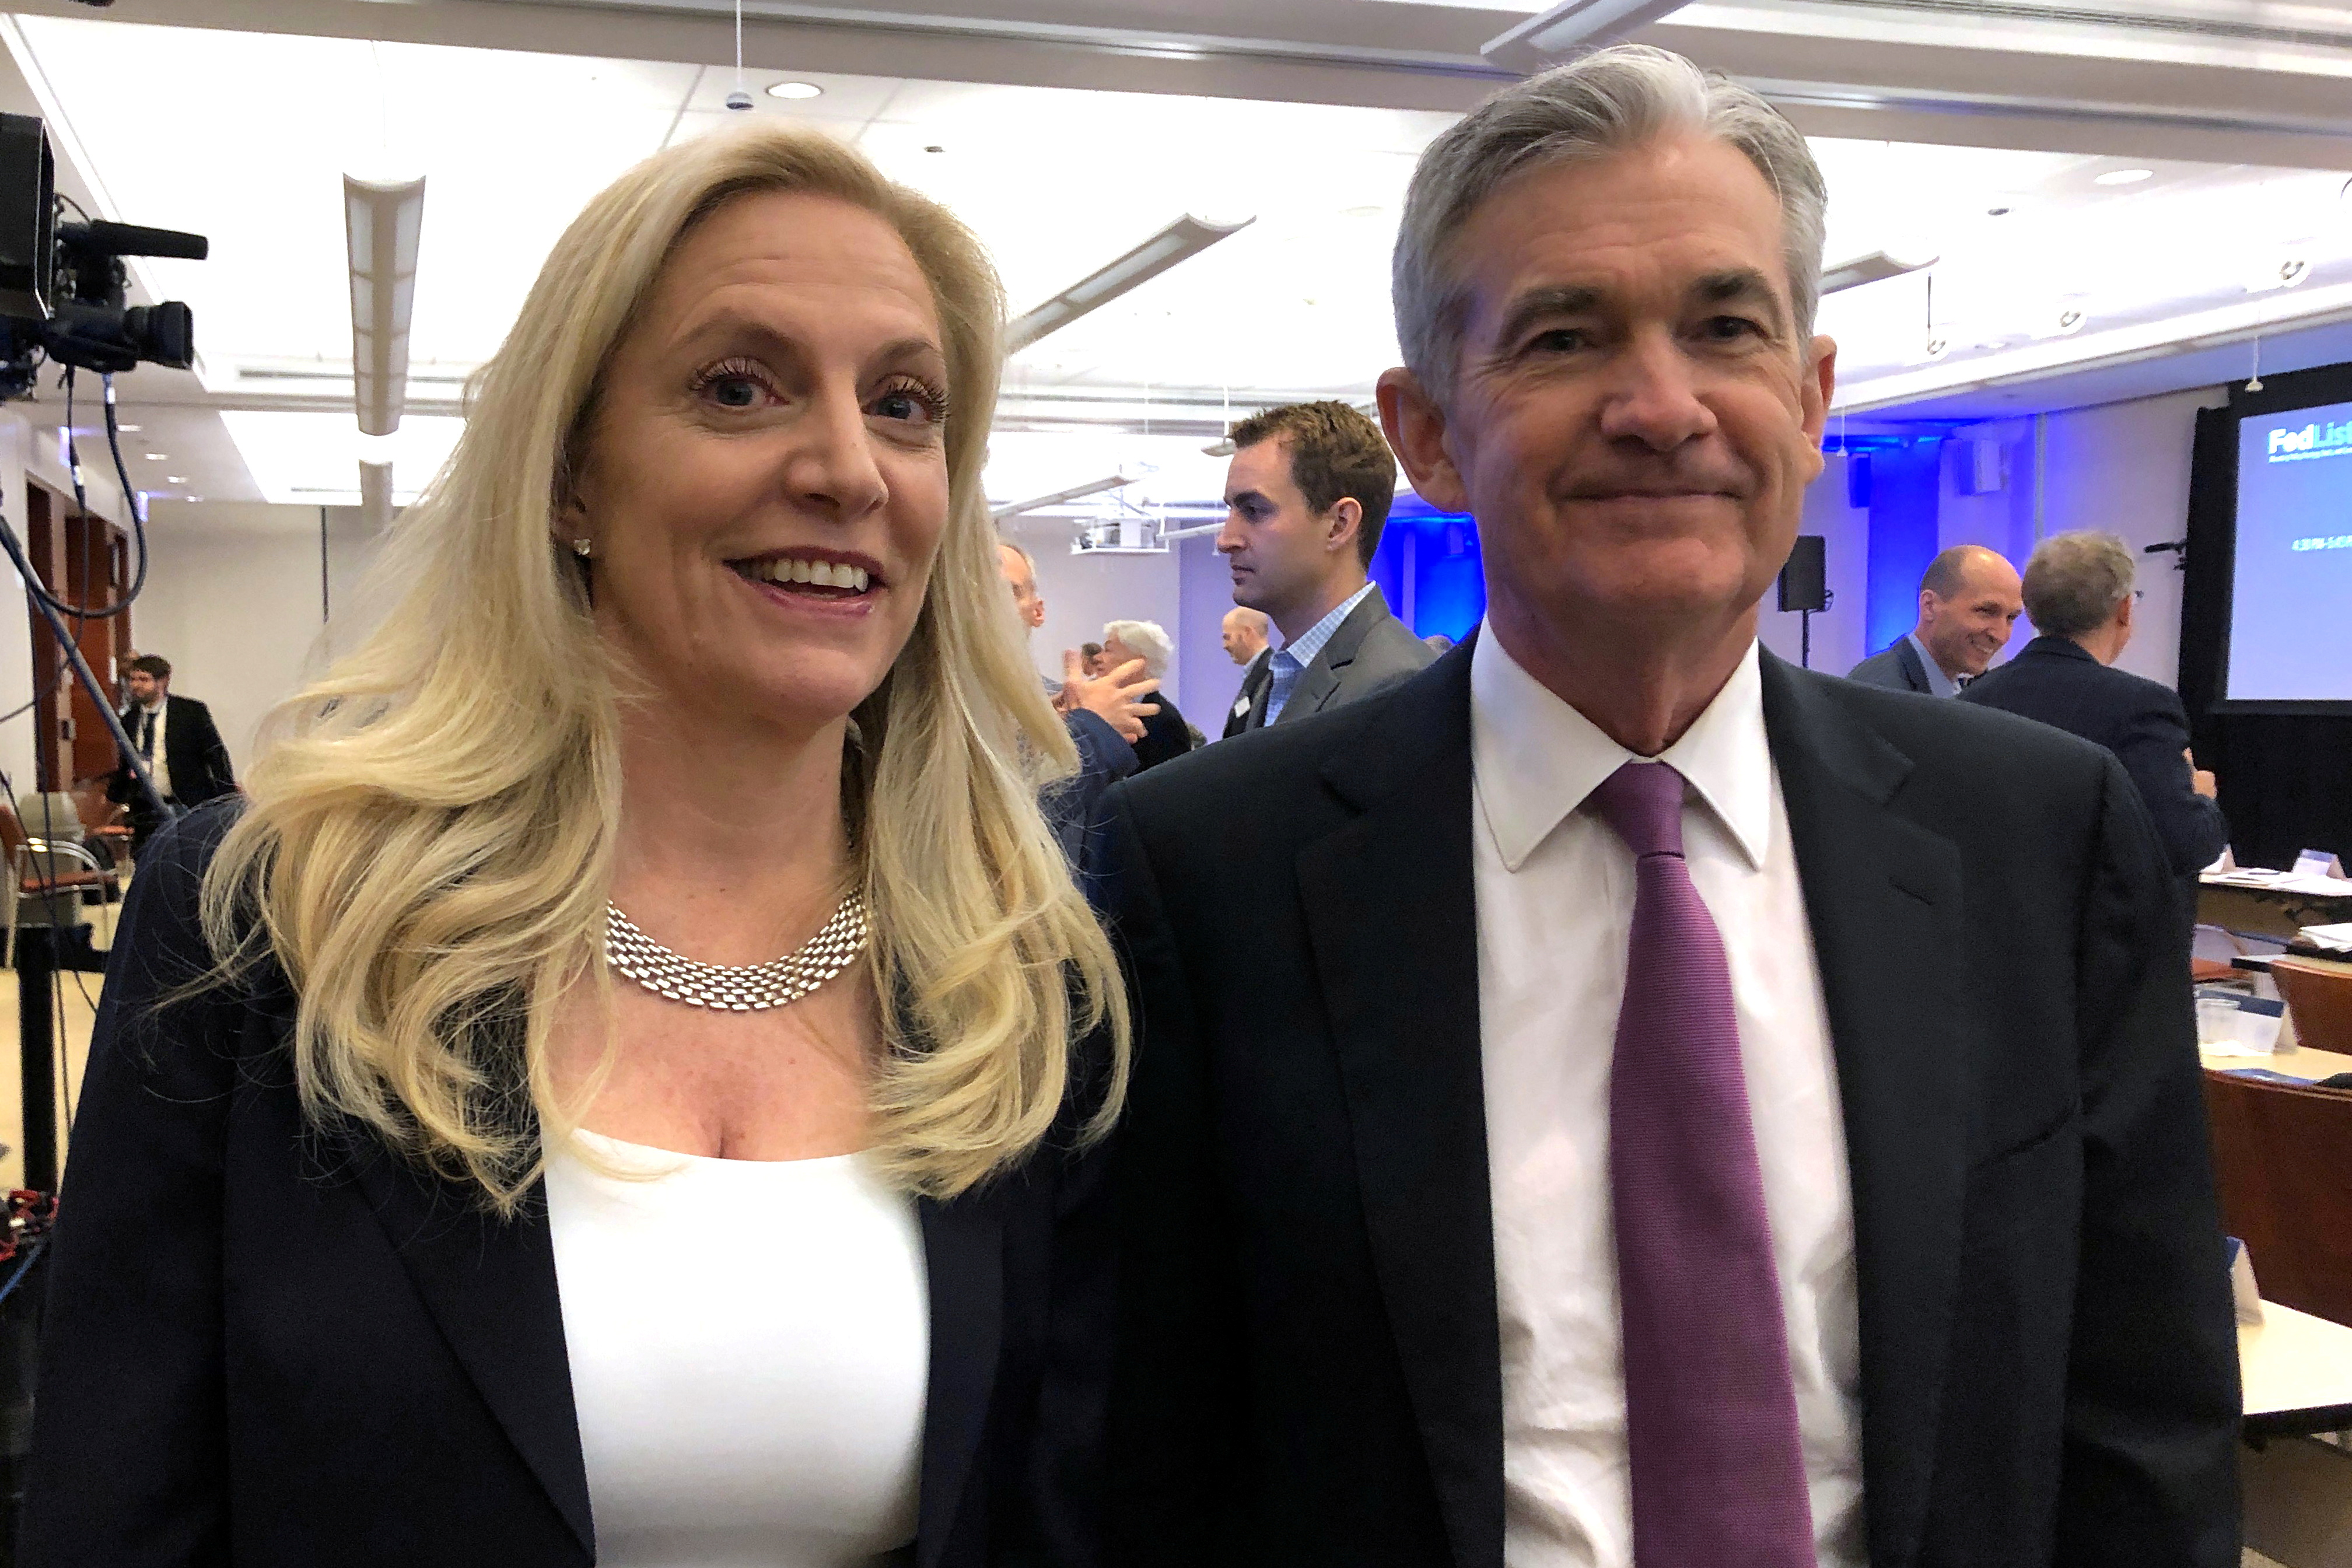 Federal Reserve Chairman Jerome Powell poses for photos with Fed Governor Lael Brainard at the Federal Reserve Bank of Chicago